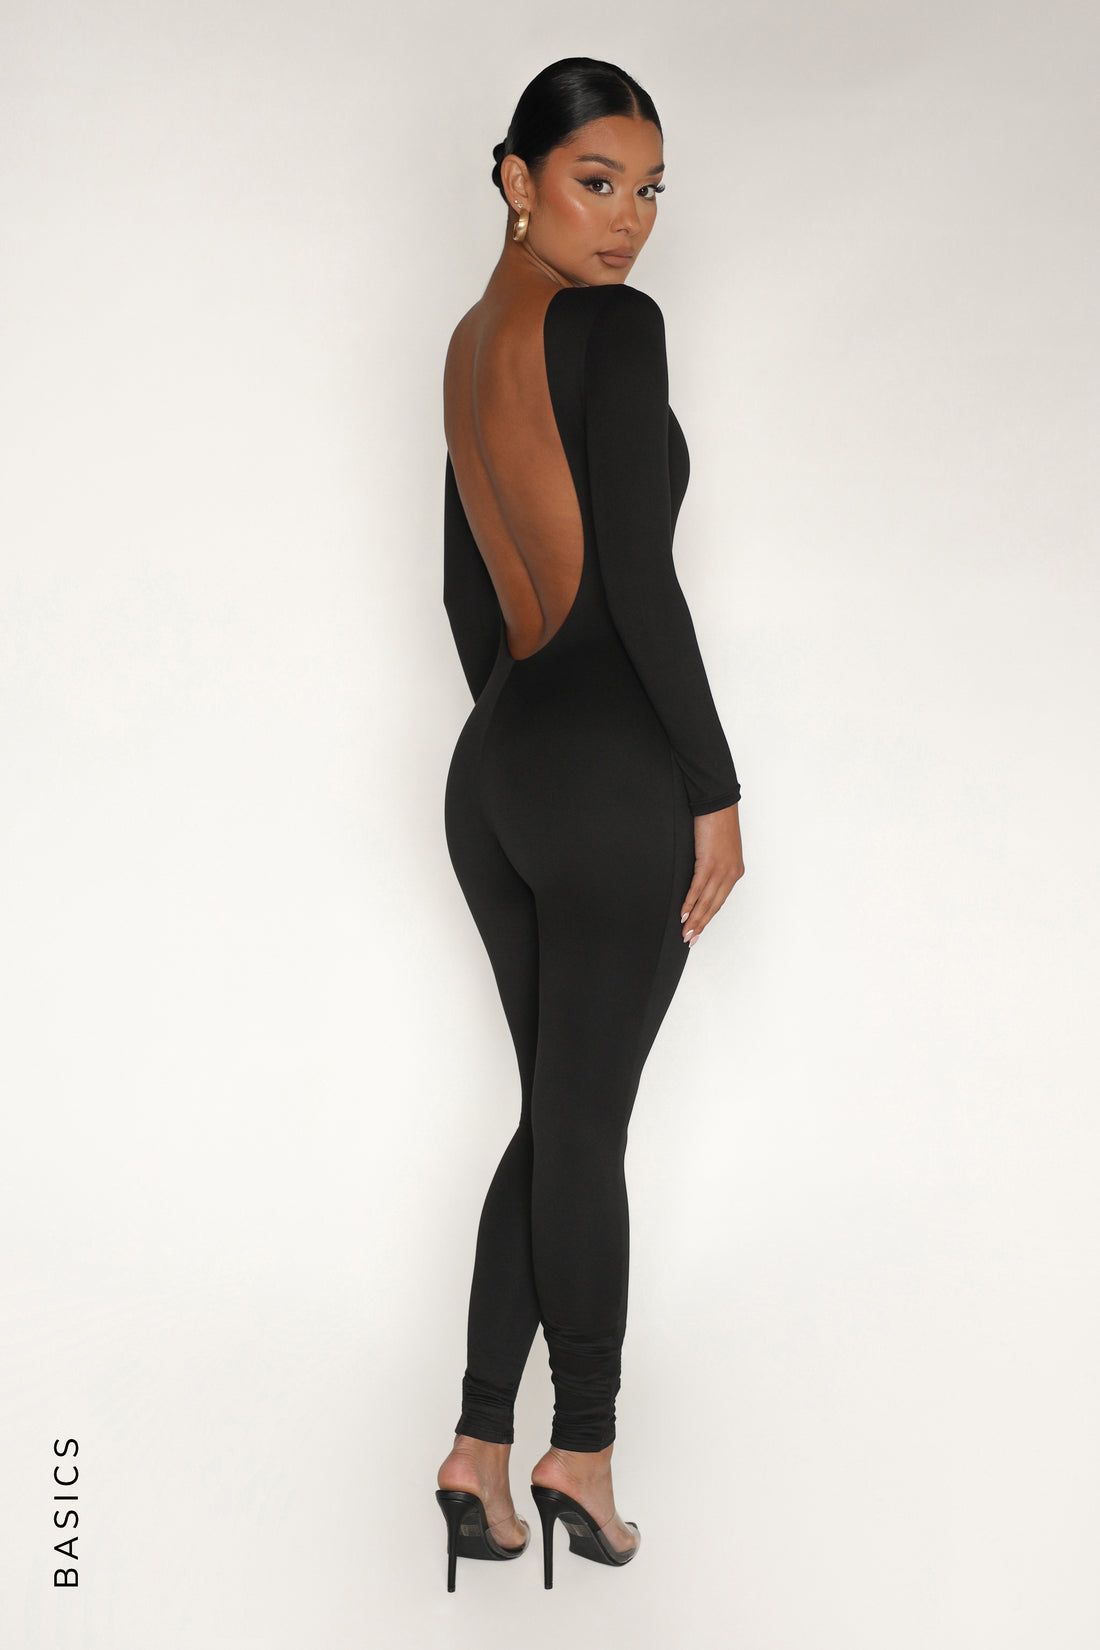 Hold Me Back Long Sleeve Backless Jumpsuit - Black – My Outfit Online